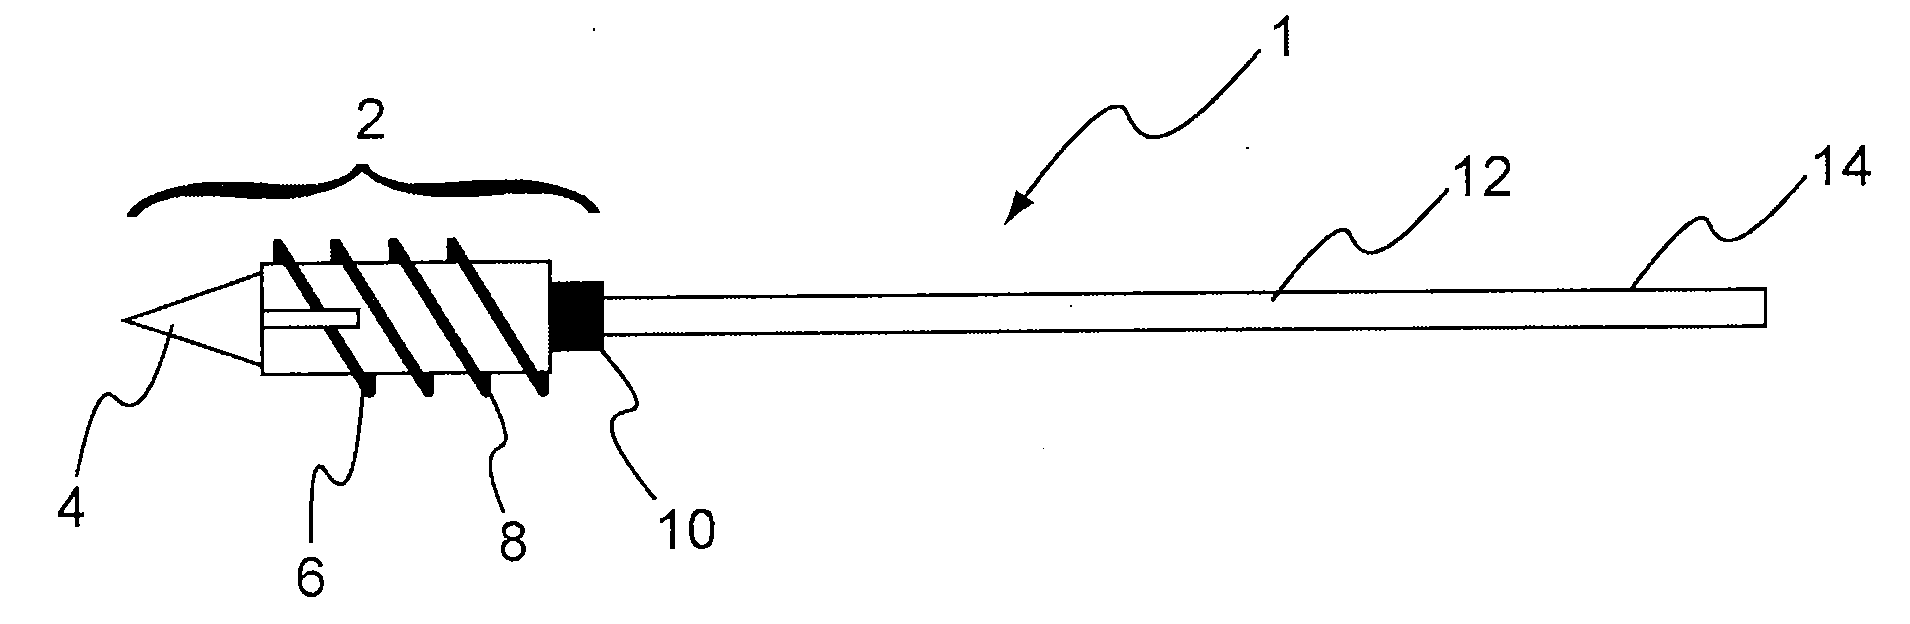 System and method for a cap used in the fixation of bone fractures